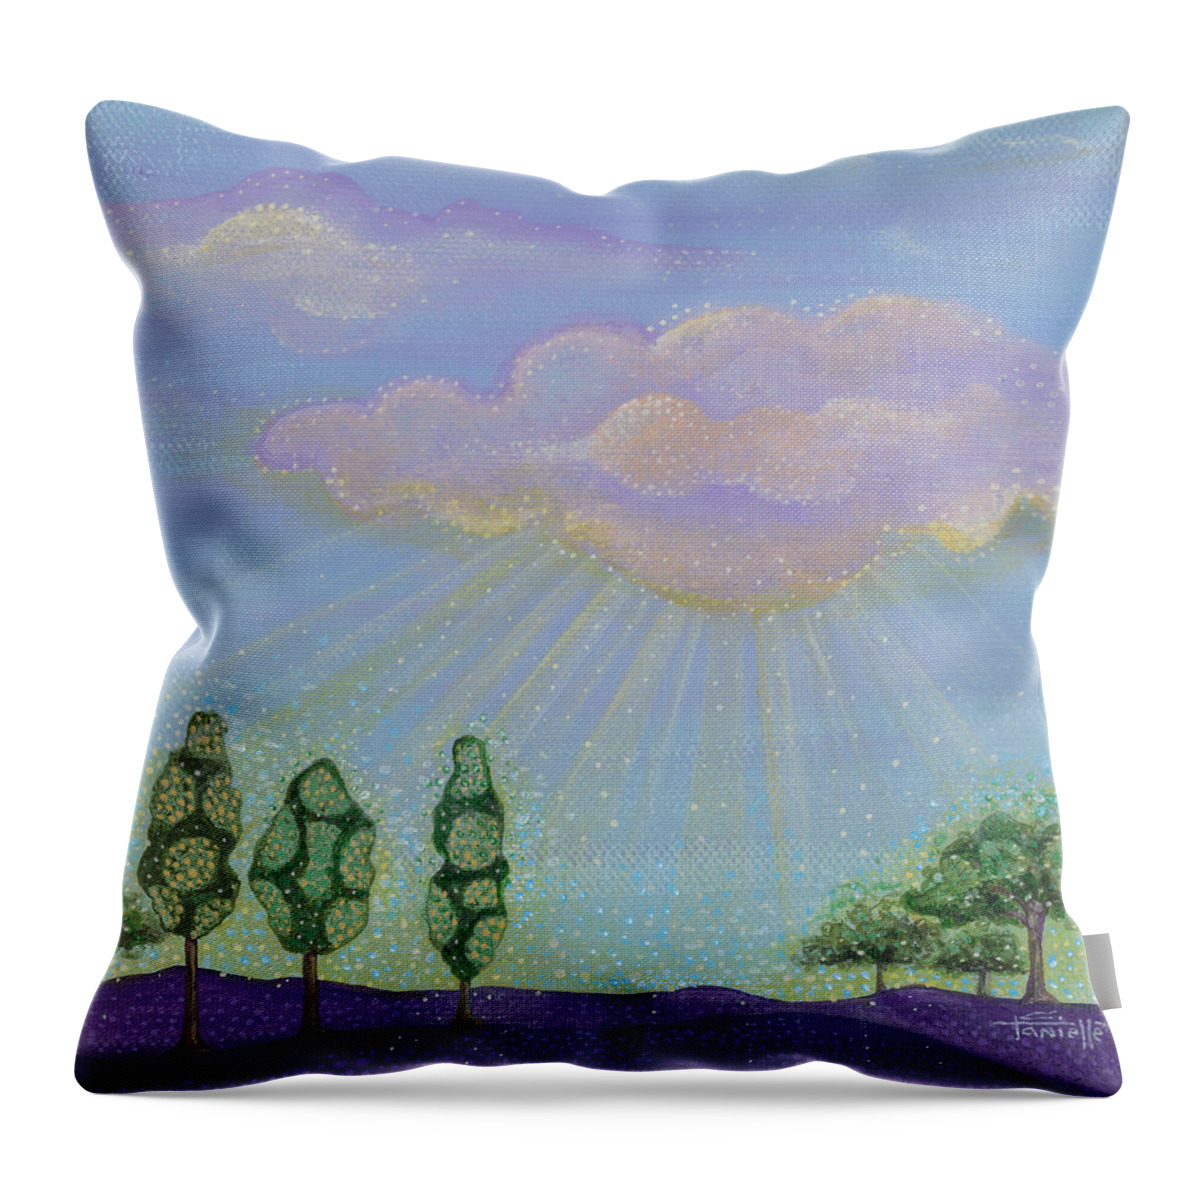 God's Grace Throw Pillow featuring the painting God's Grace by Tanielle Childers